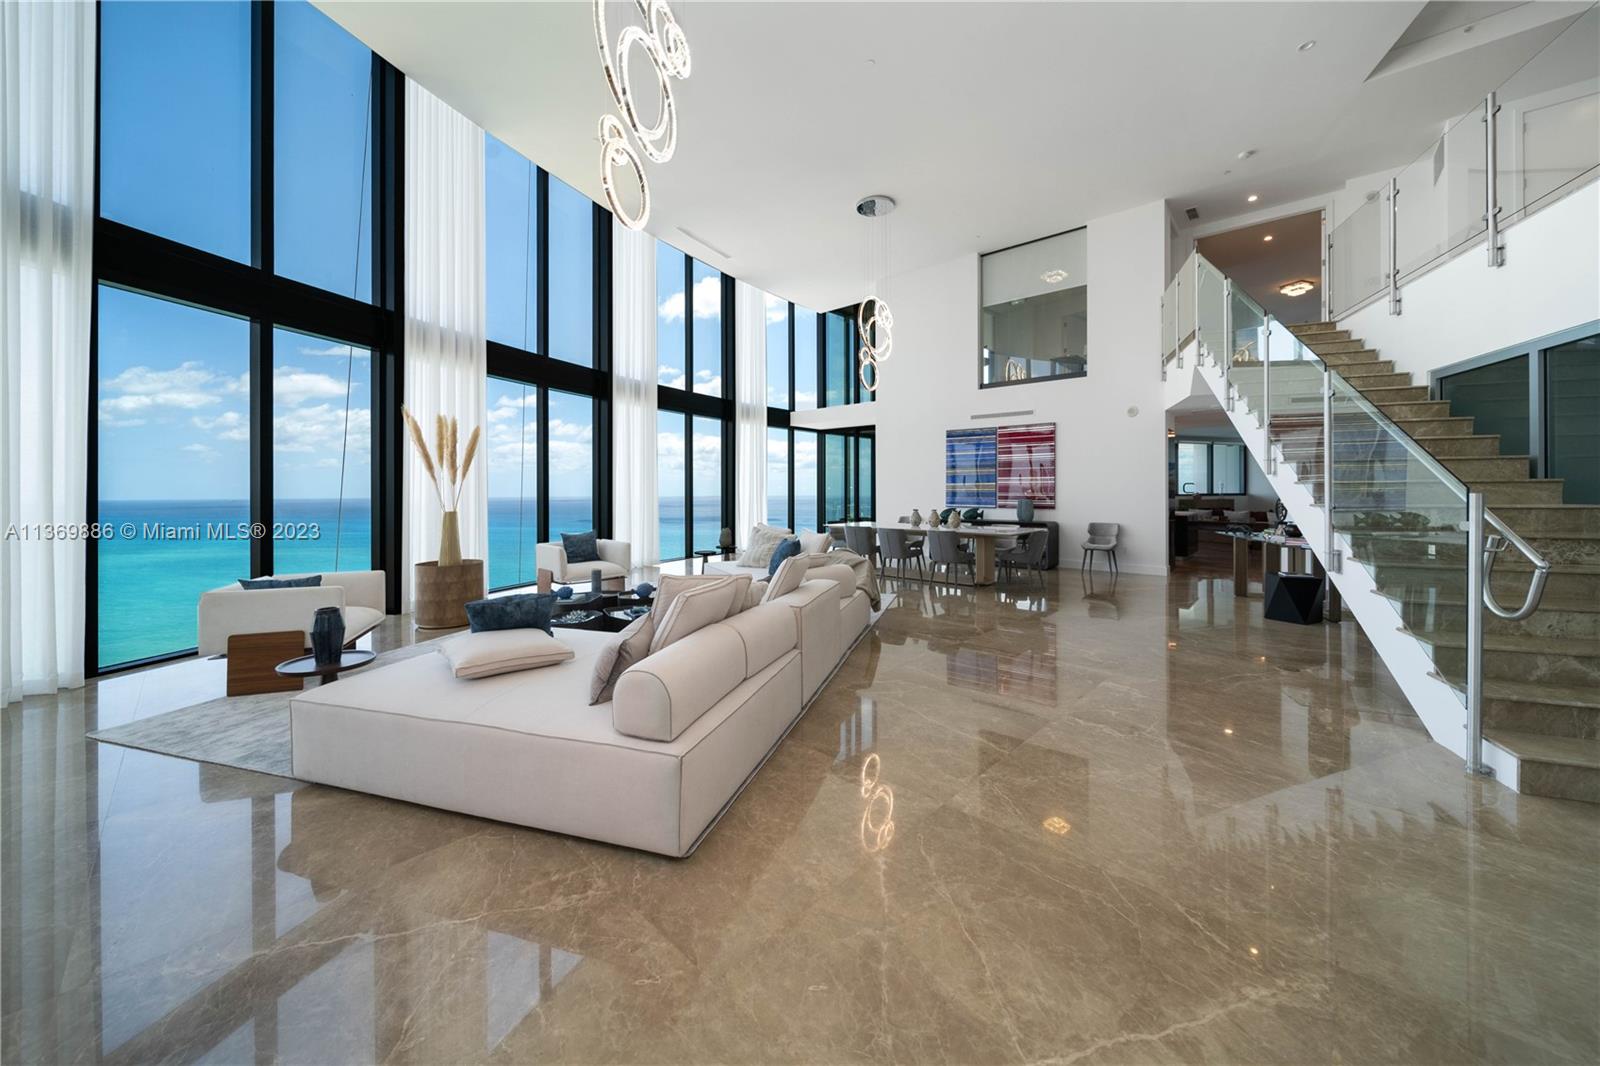 Last spectacular Duplex PH unit available with best view in the building. Two story residence in Porsche Design Tower with 4 car garage, internal elevator, private pool, 2 balconies, 2 huge master bedrooms, sleek designer kitchen, Emperador Spanish Marble 48/48, unobstructed ocean and intracoastal views, private beach with sunset, pool yoga center, state of the art gym, with simulator technology (VRX motion Z-55 racing), movie theater, restaurant and more! Monthly maintenance to be checked by buyer realtor.